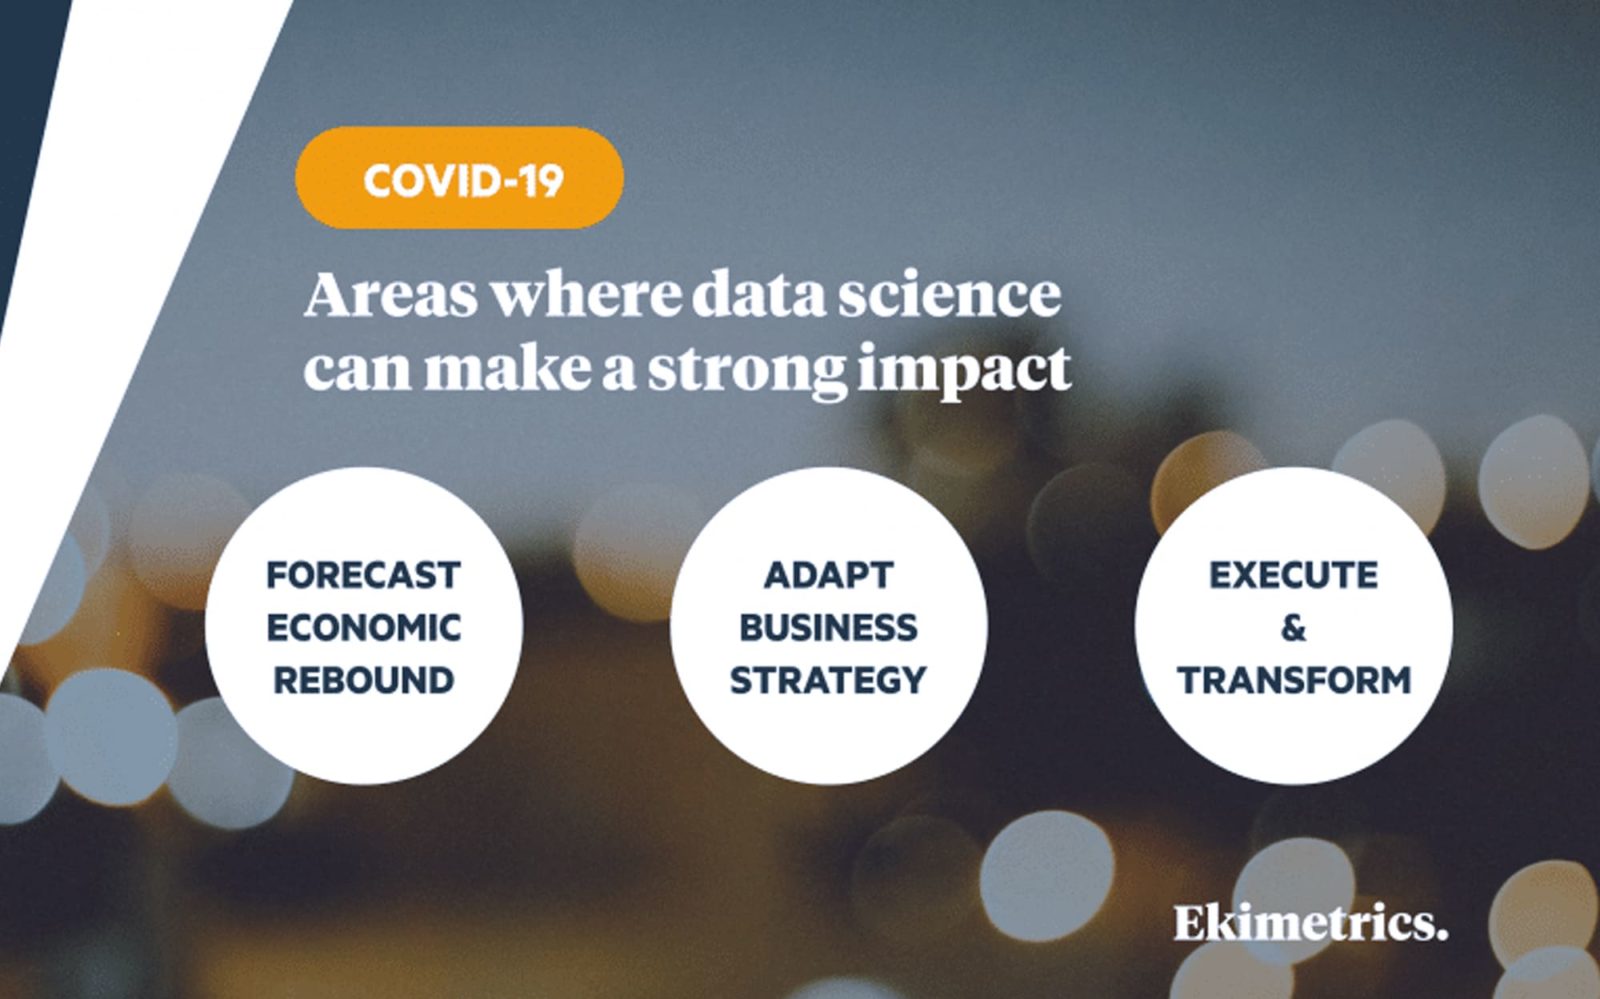 How to respond to Covid-19, leveraging Data Science?